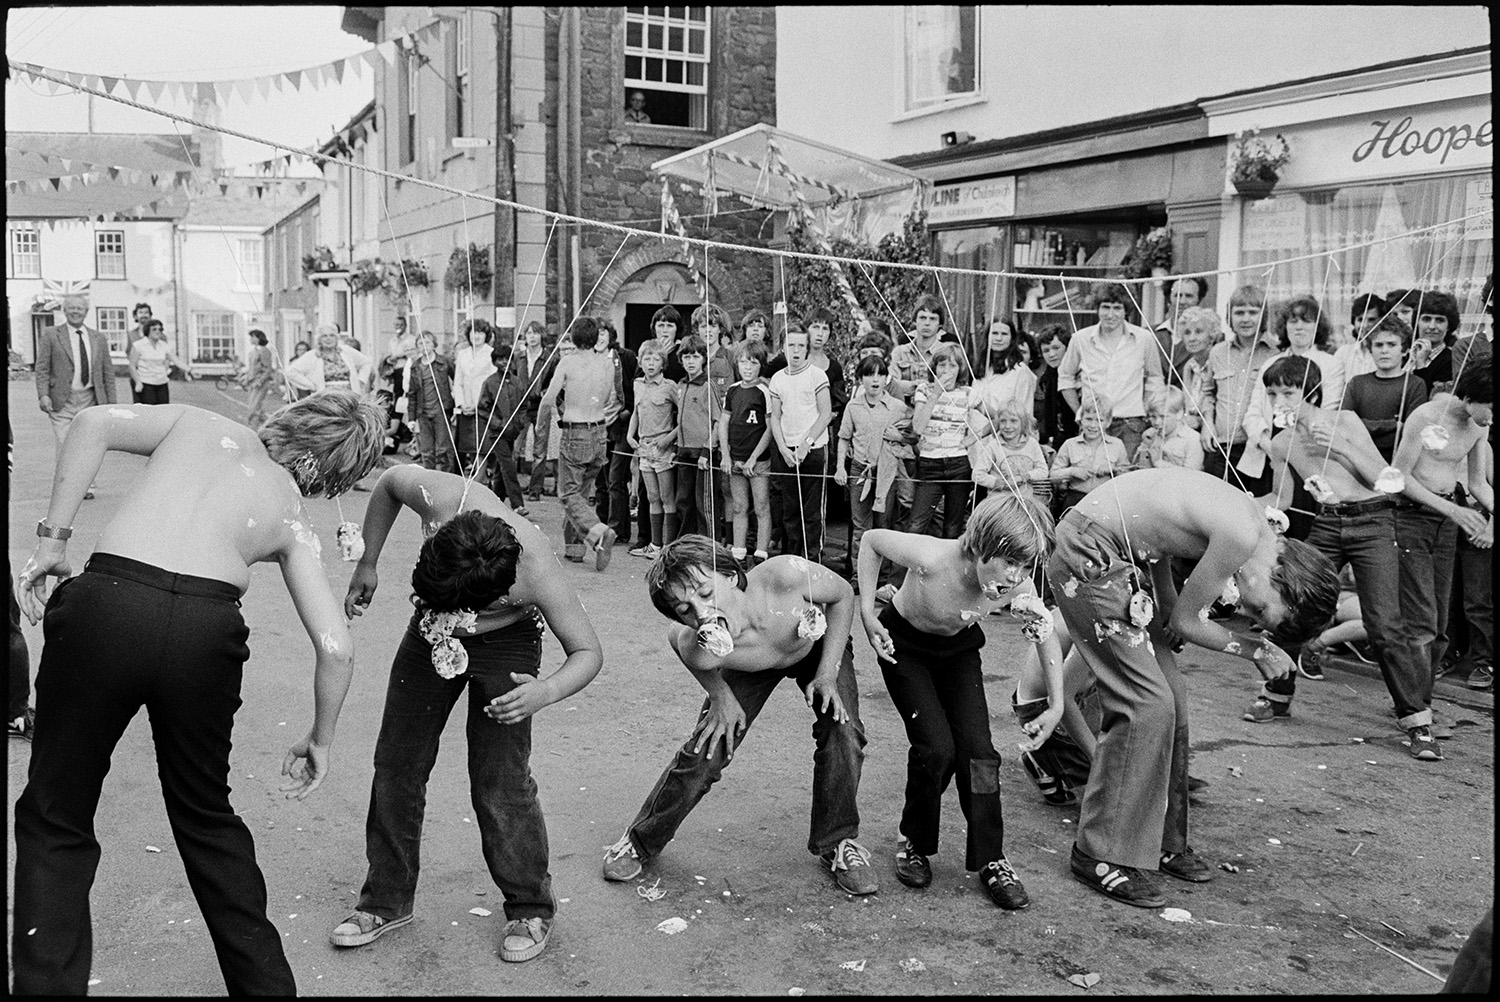 Sack race, eating buns on string in street. 
[Boys eating buns suspended on strings across a street, in a competition at Chulmleigh fair. People are gathered around watching.]